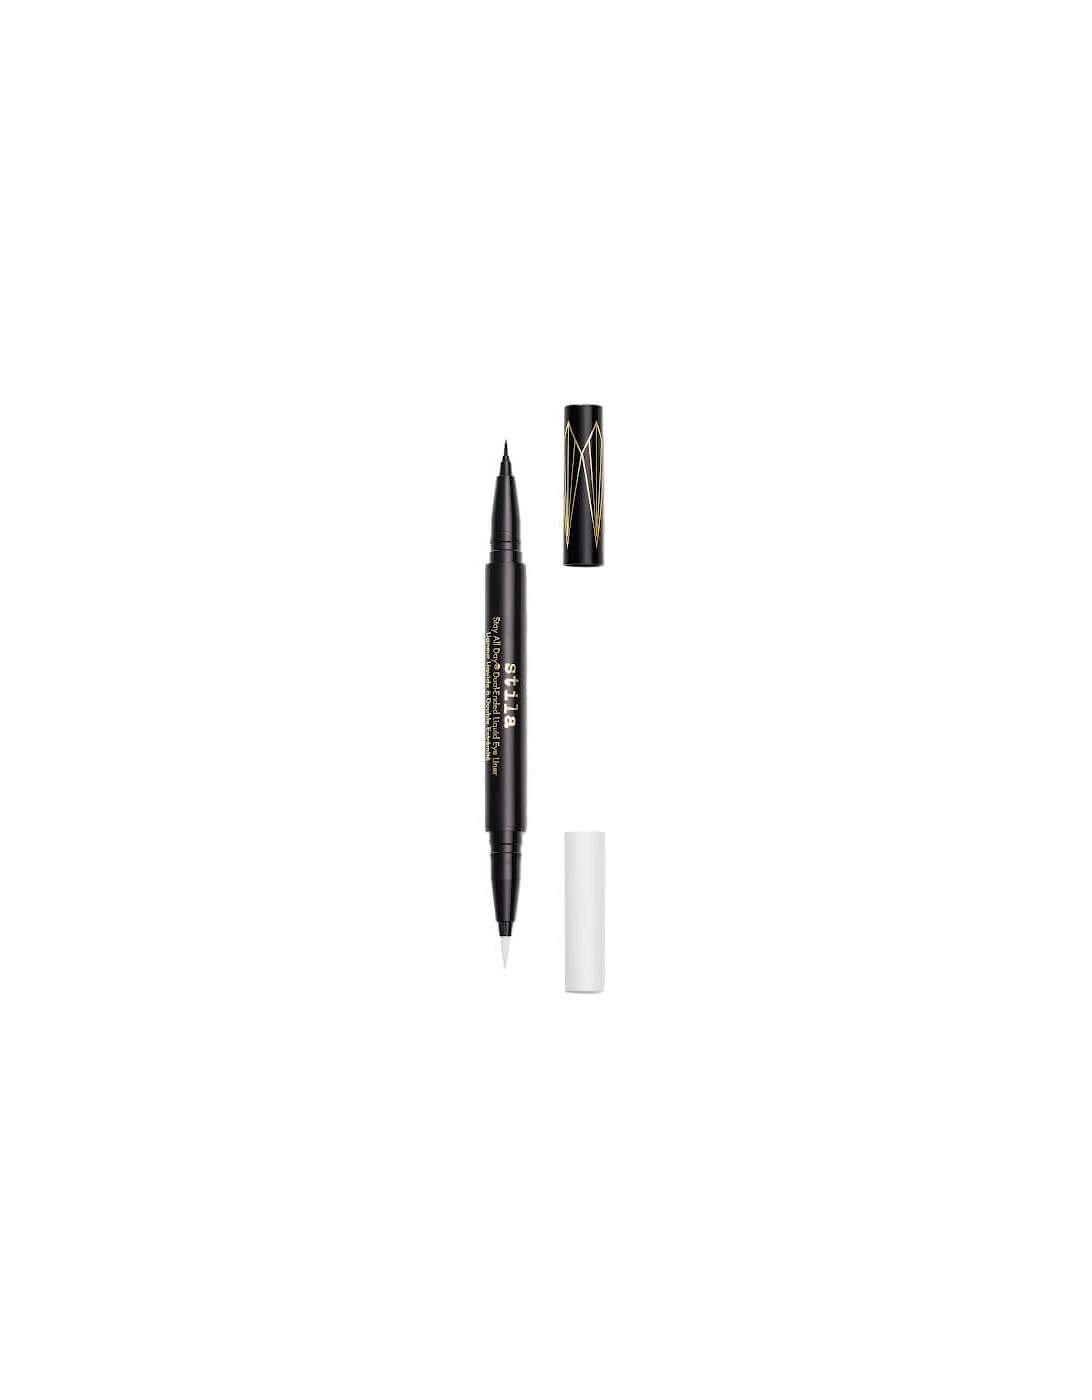 Stay All Day Dual-Ended Liquid Eye Liner - Intense Black/Snow, 2 of 1